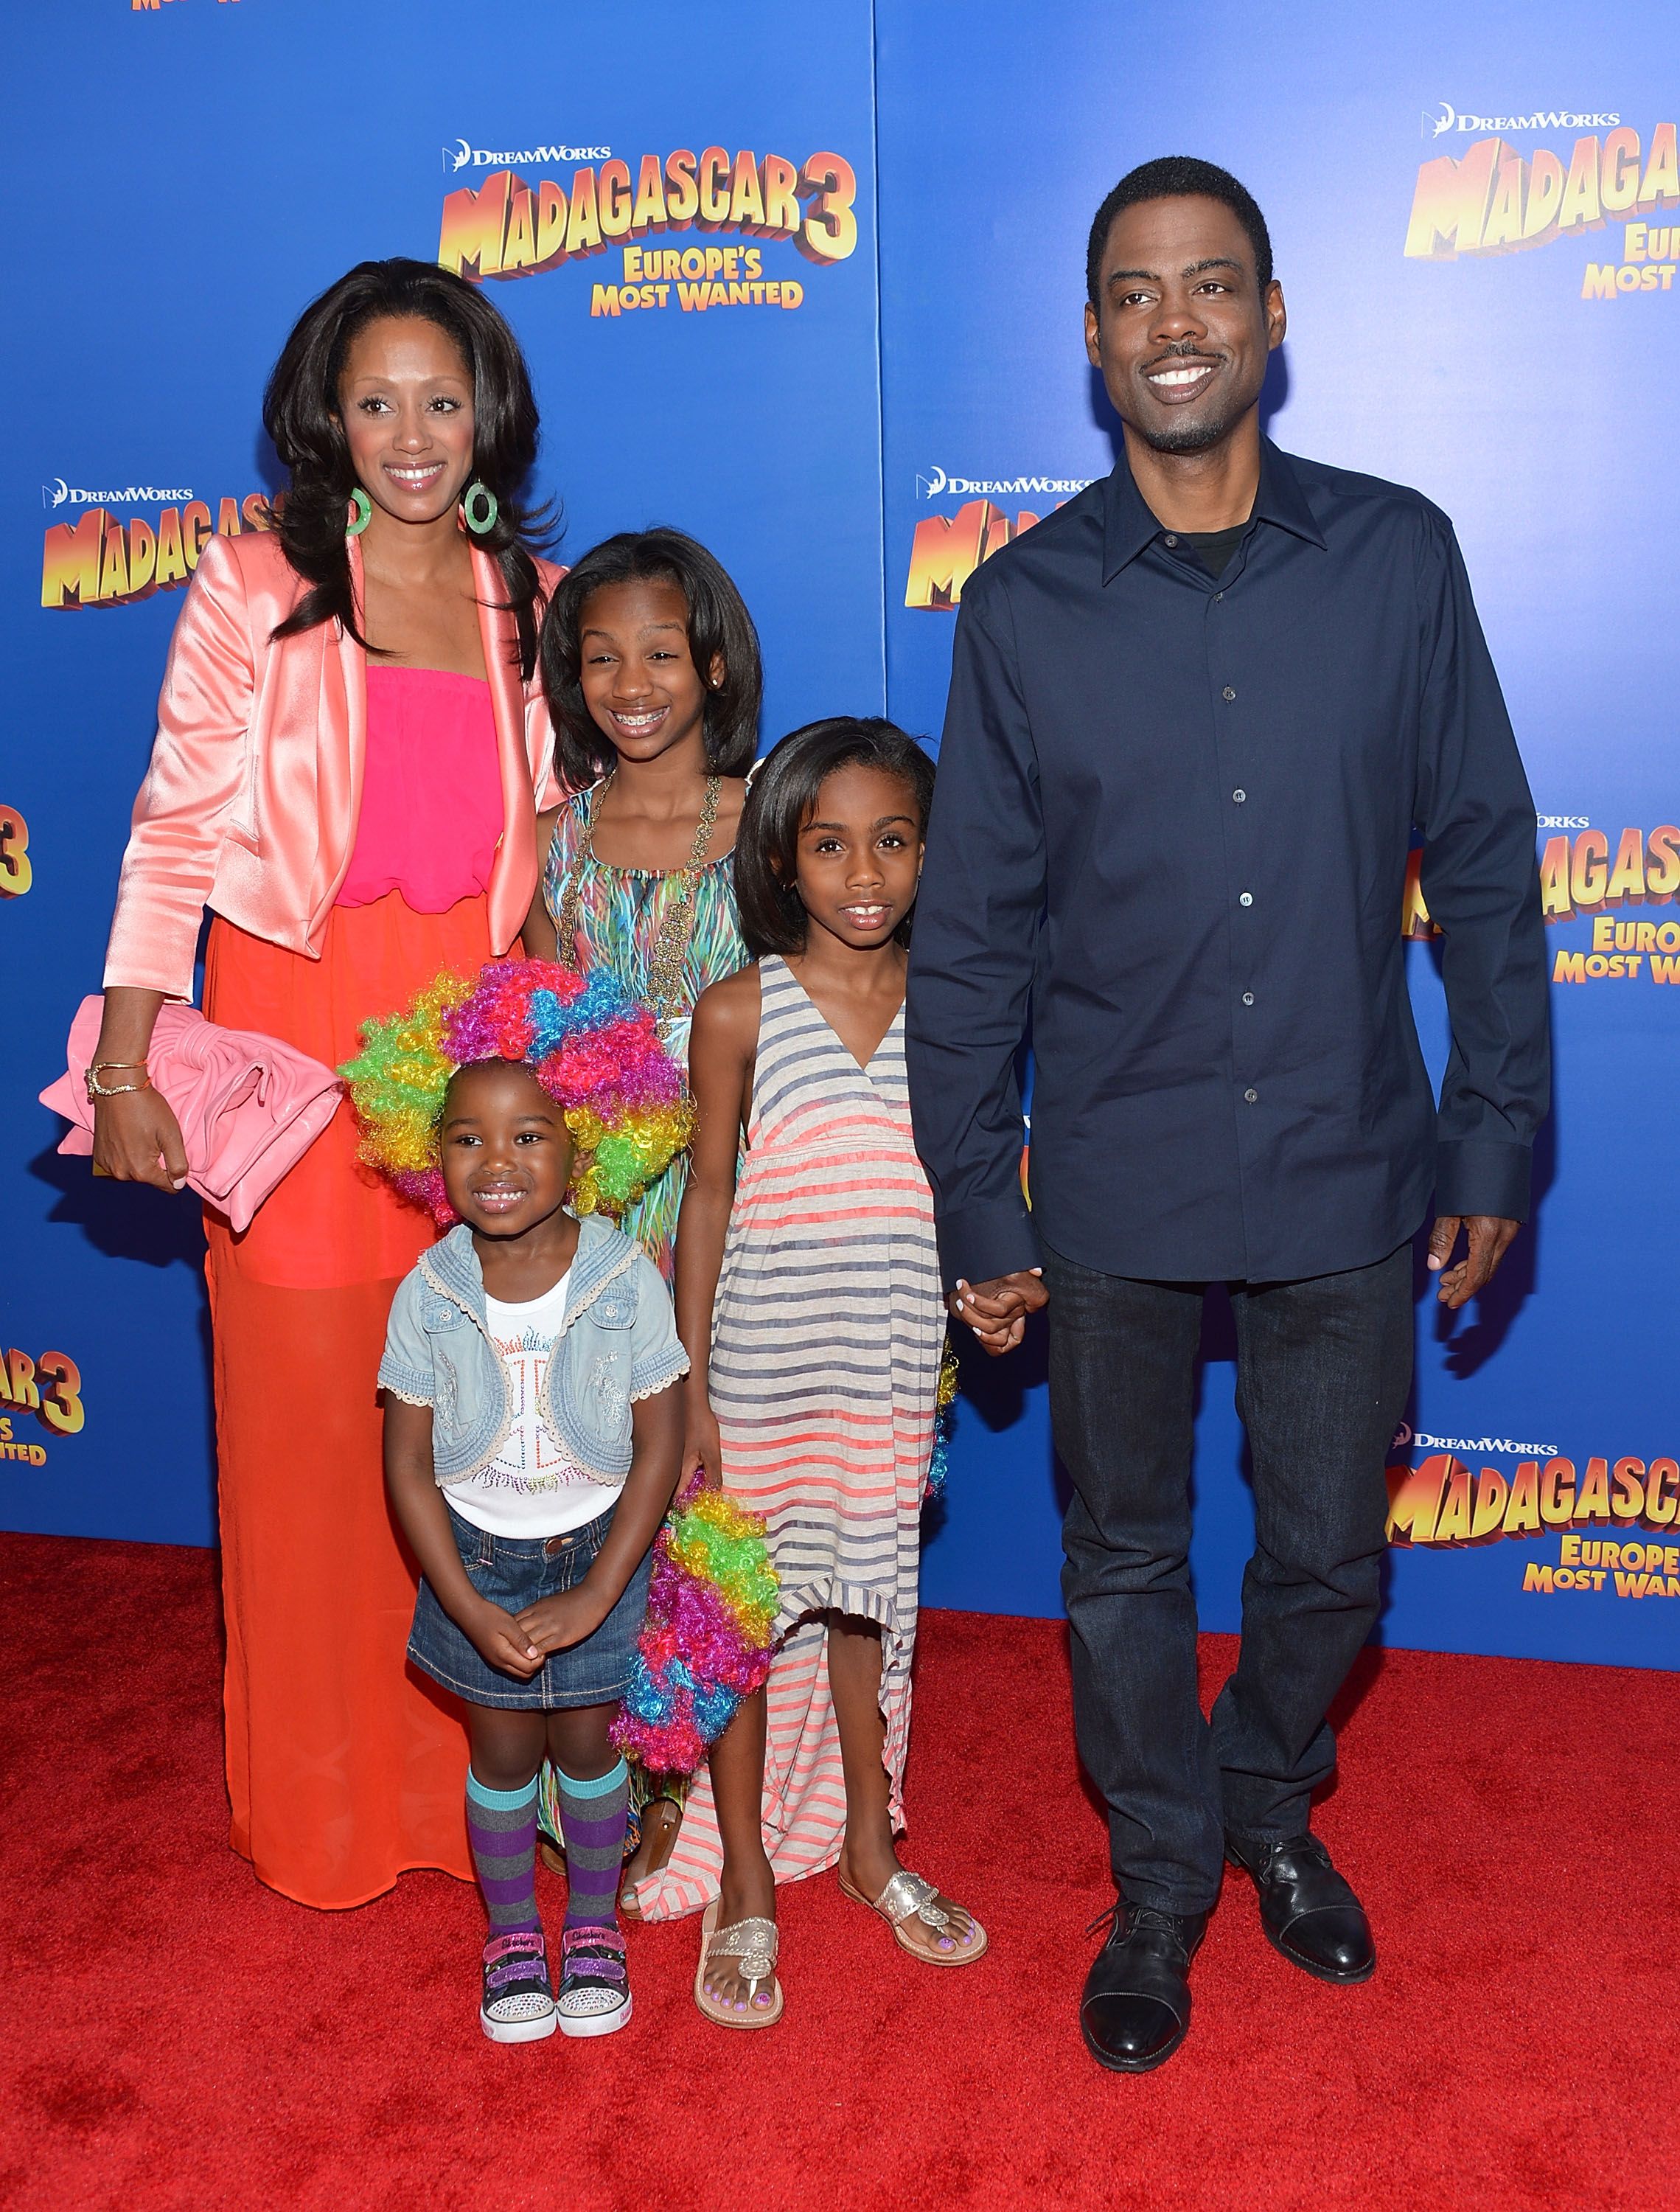 Malaak Compton-Rock, Lola Simone, Zahra Savannah, and Chris Rock during the "Madagascar 3: Europe's Most Wanted" New York Premier at Ziegfeld Theatre on June 7, 2012 in New York City. | Source: Getty Images